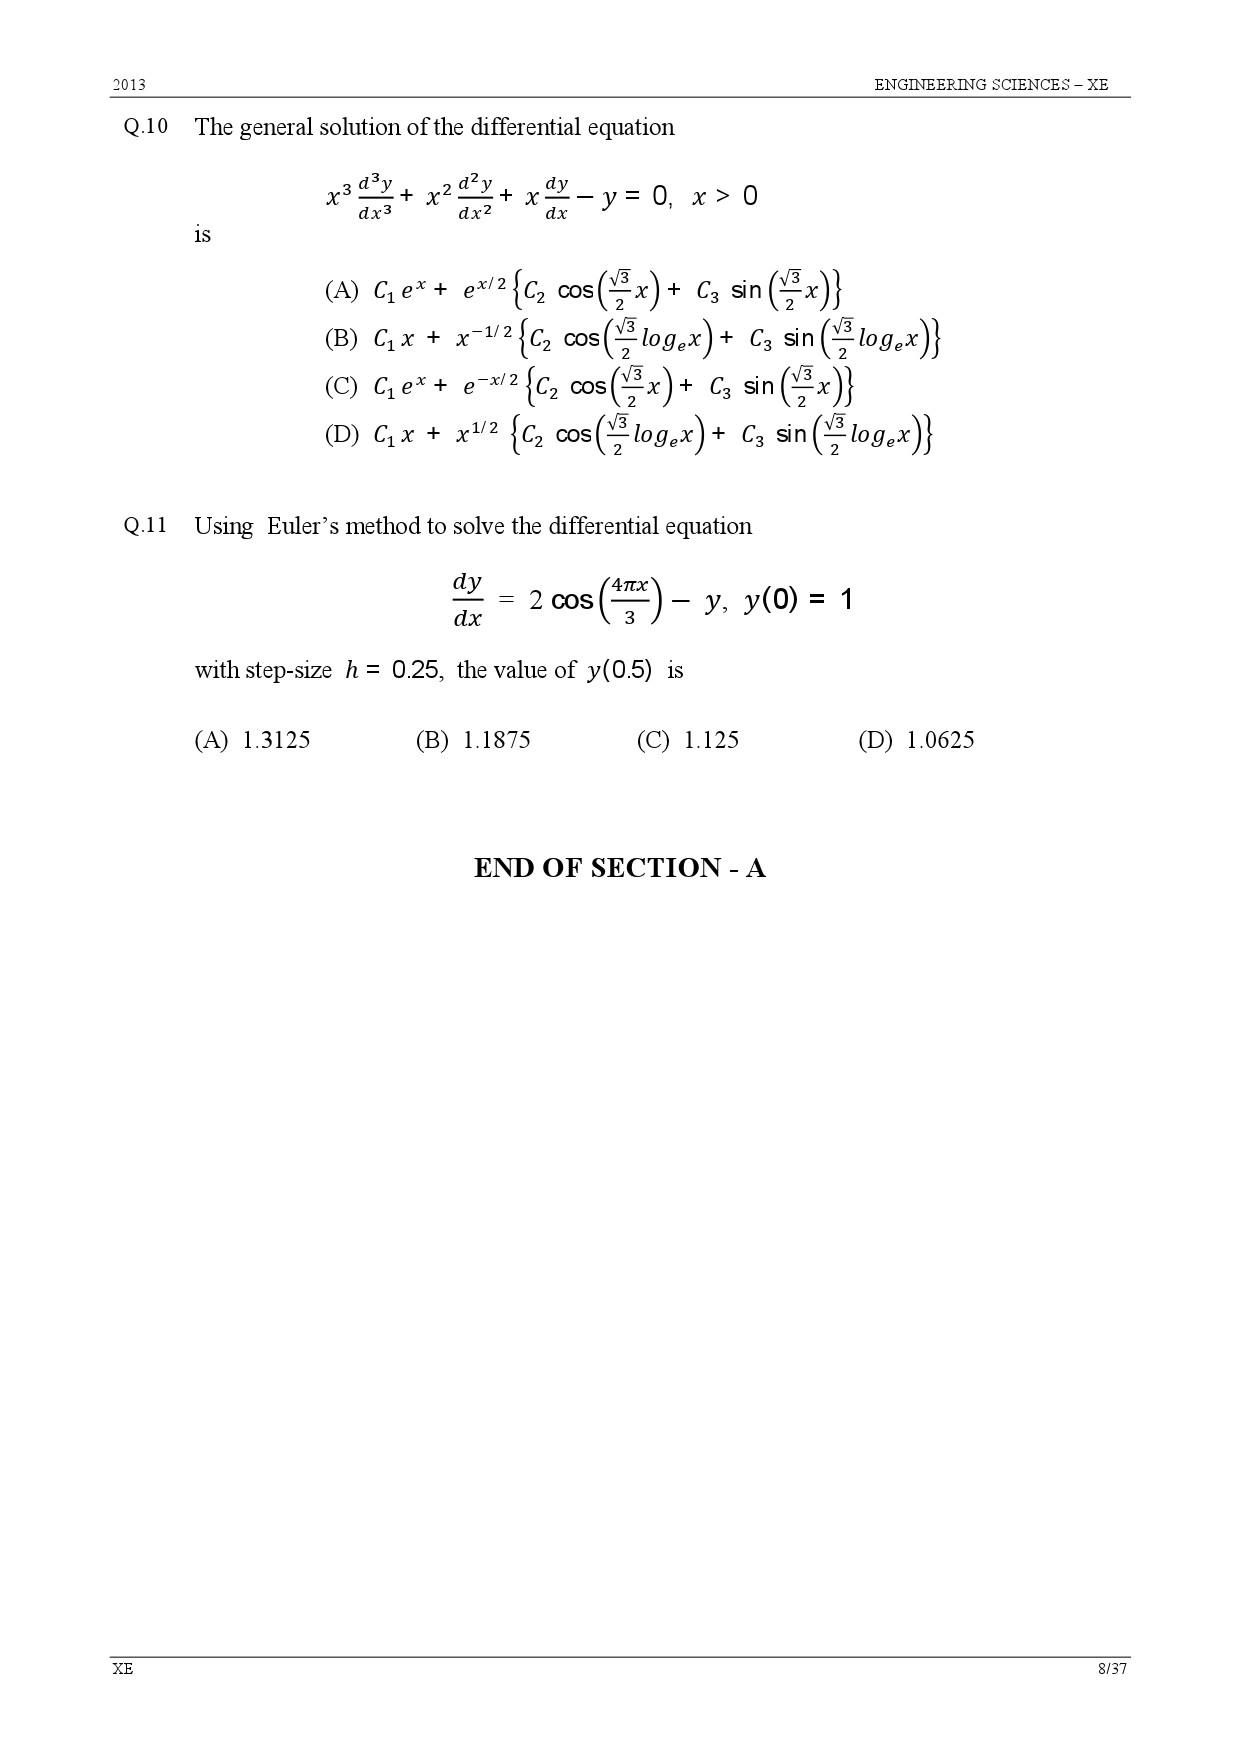 GATE Exam Question Paper 2013 Engineering Sciences 8